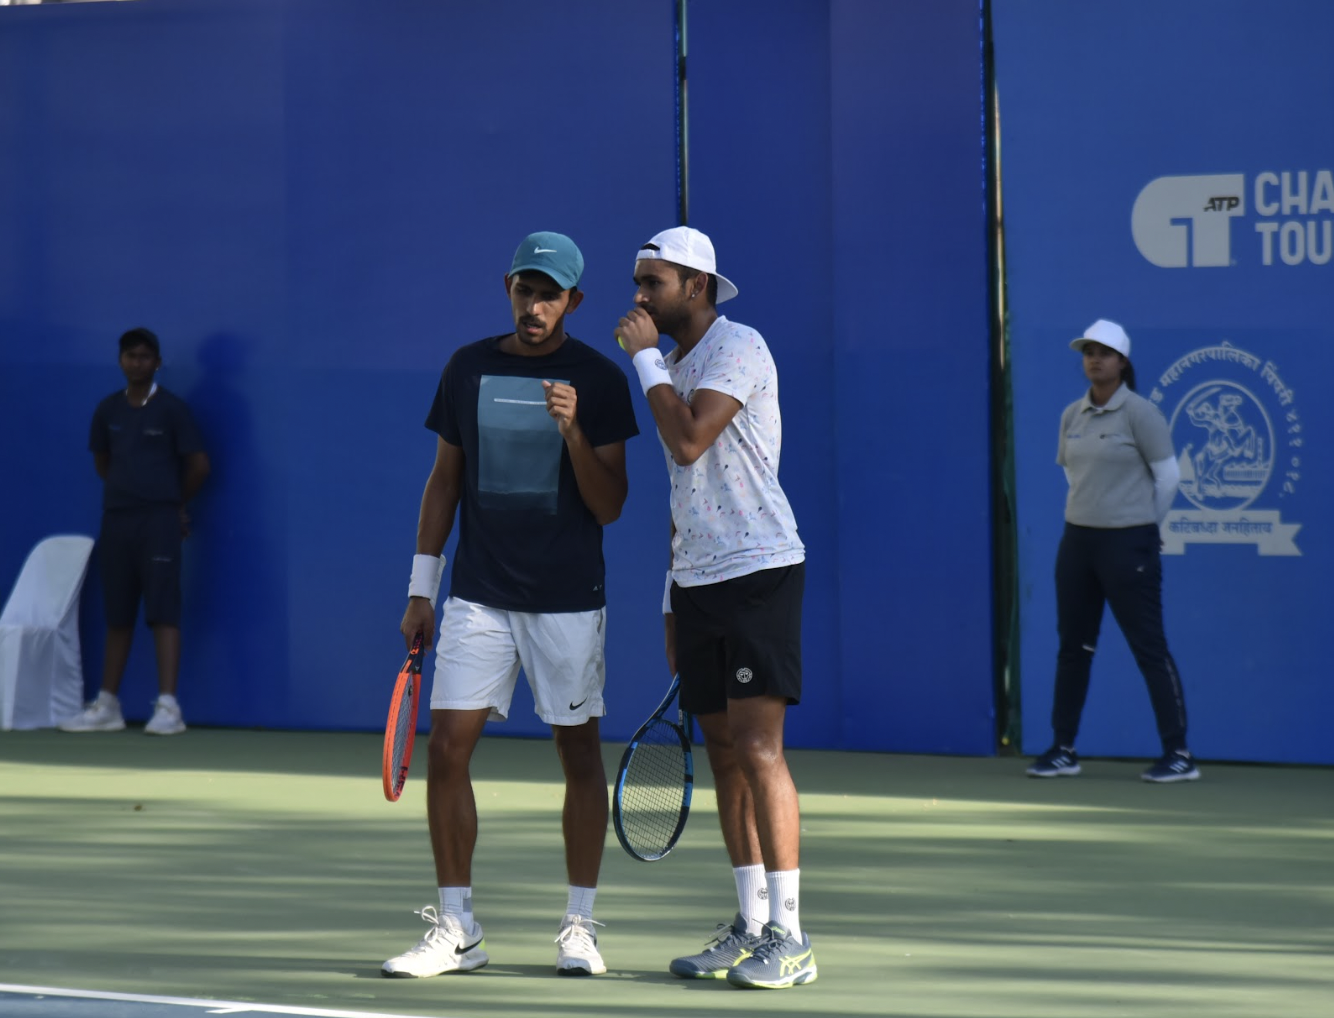 “I did not expect us to combine so well” – Parikshit Somani, after moving into the ATP Pune Challenger Doubles QF with Siddhant Banthia